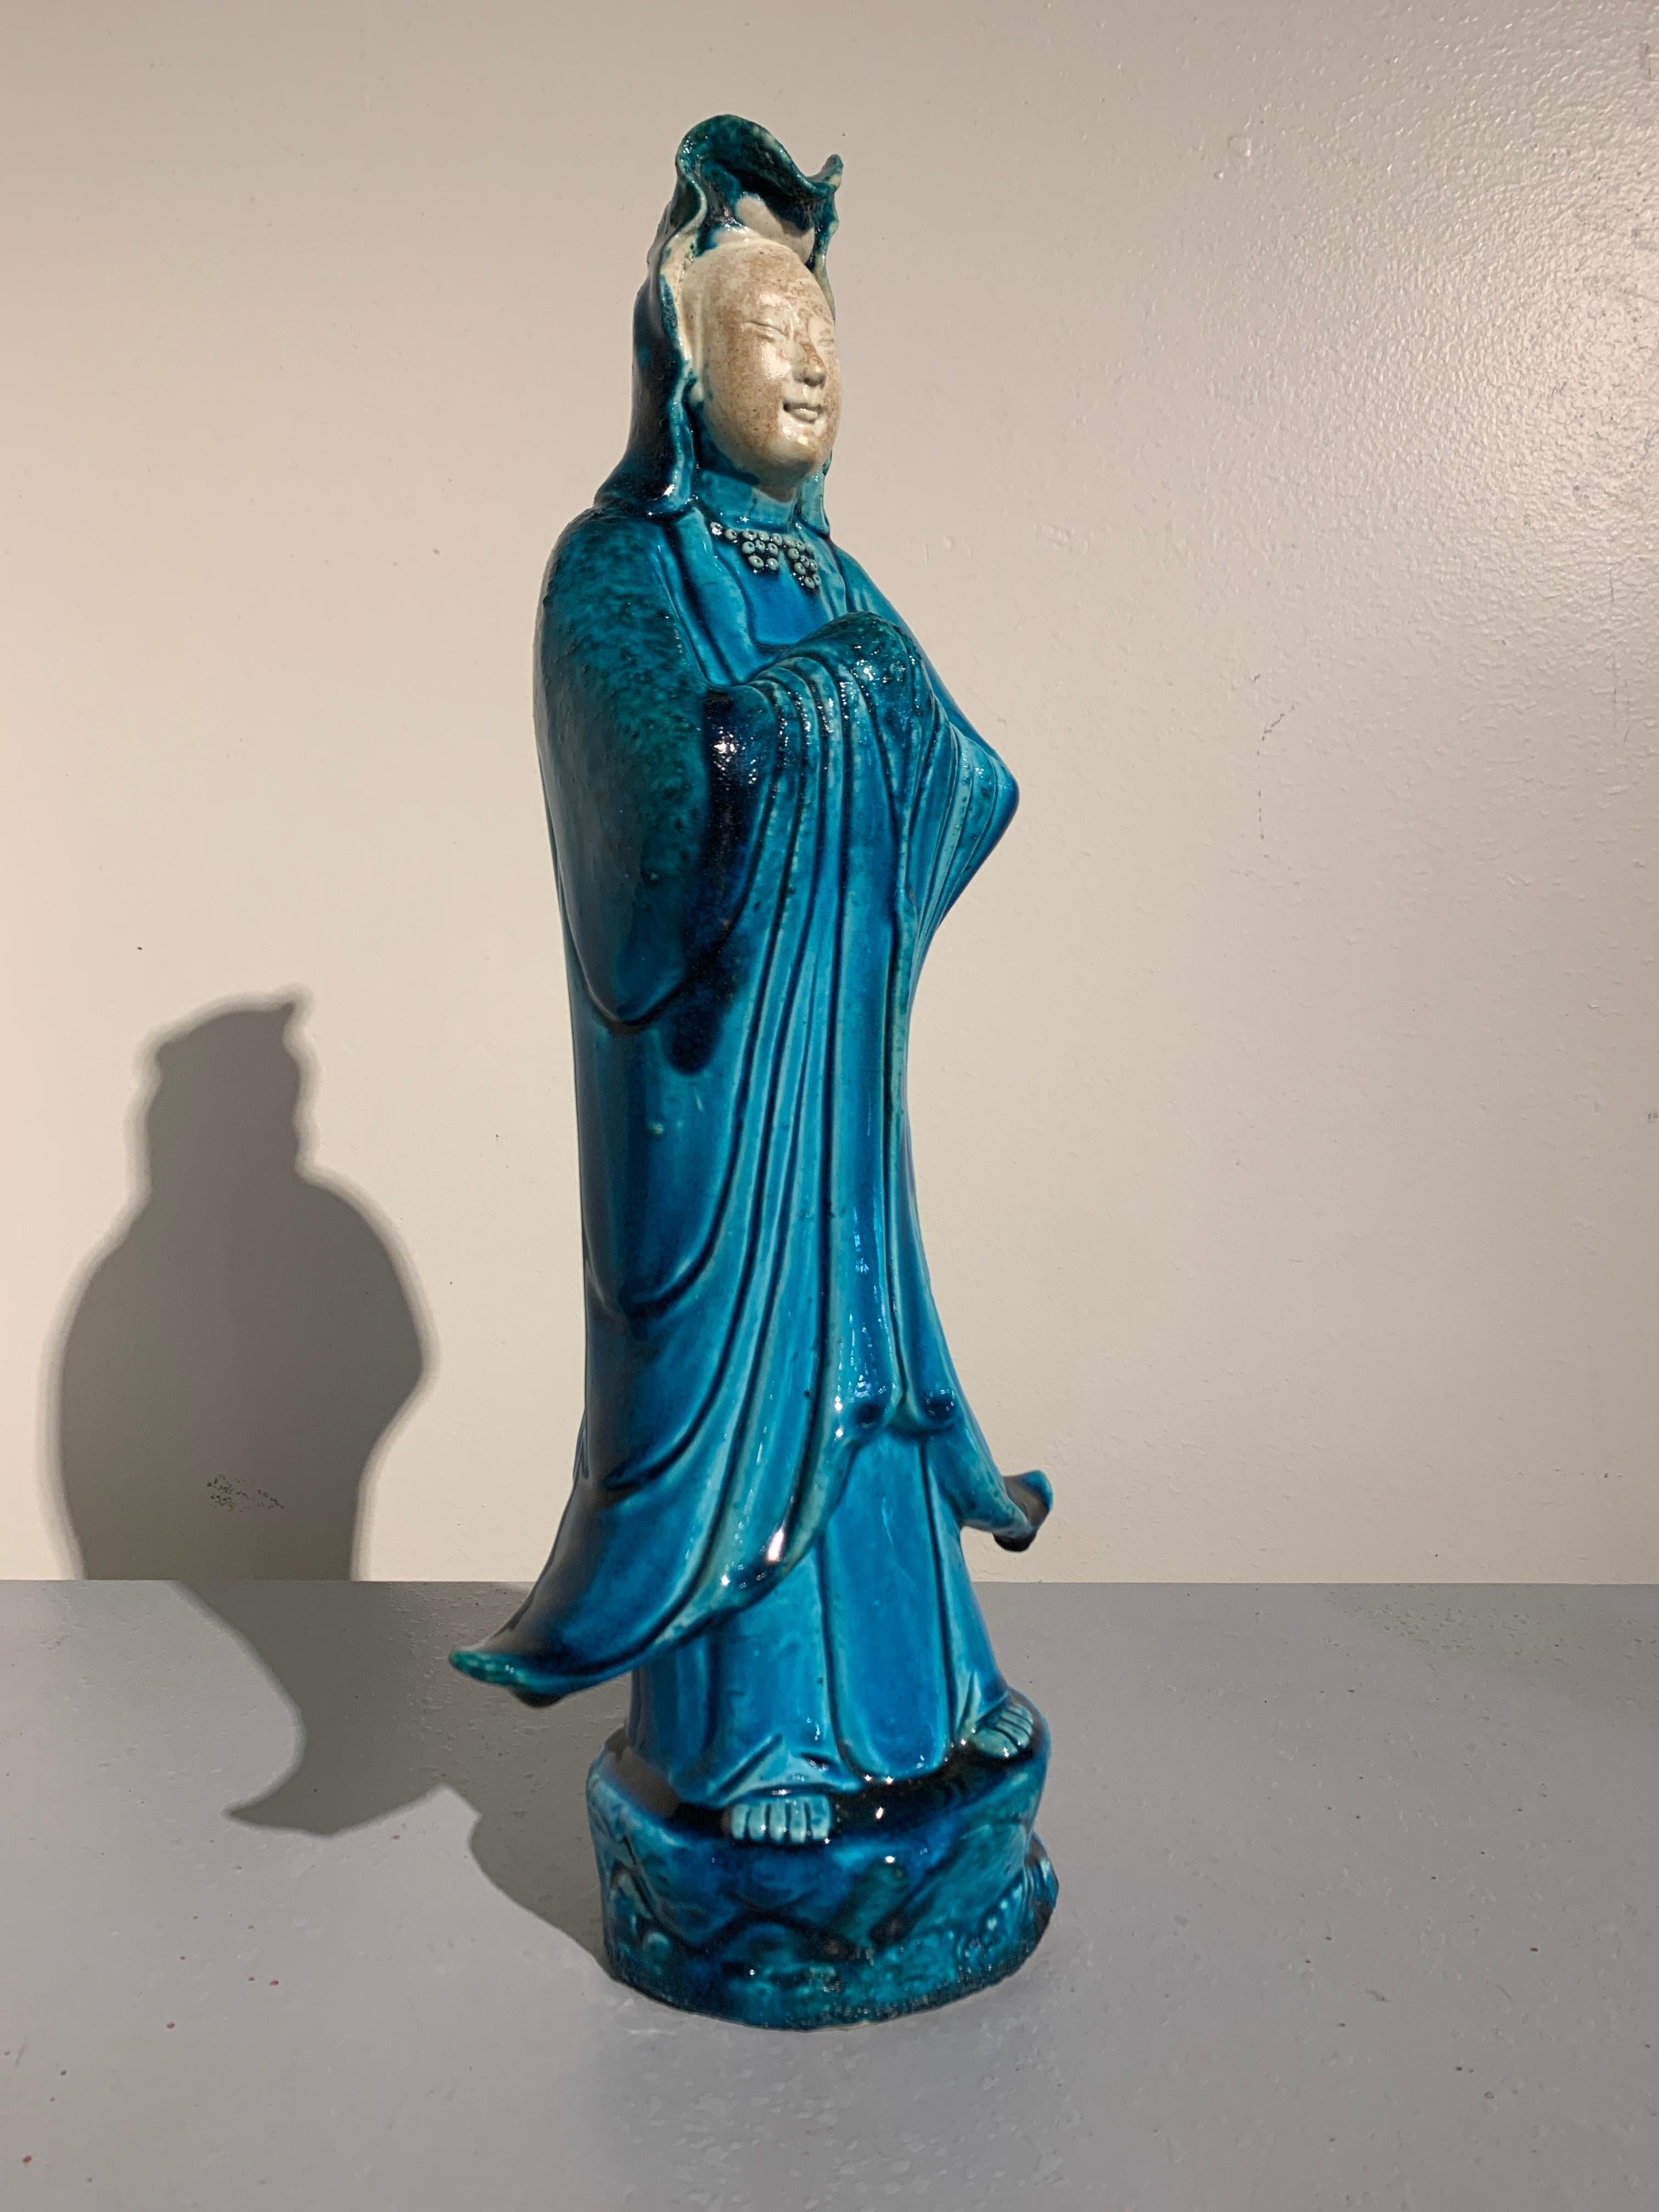 A vintage tall, turquoise glazed porcelain figure of Guanyin, the Goddess of Compassion and Mercy, with a 